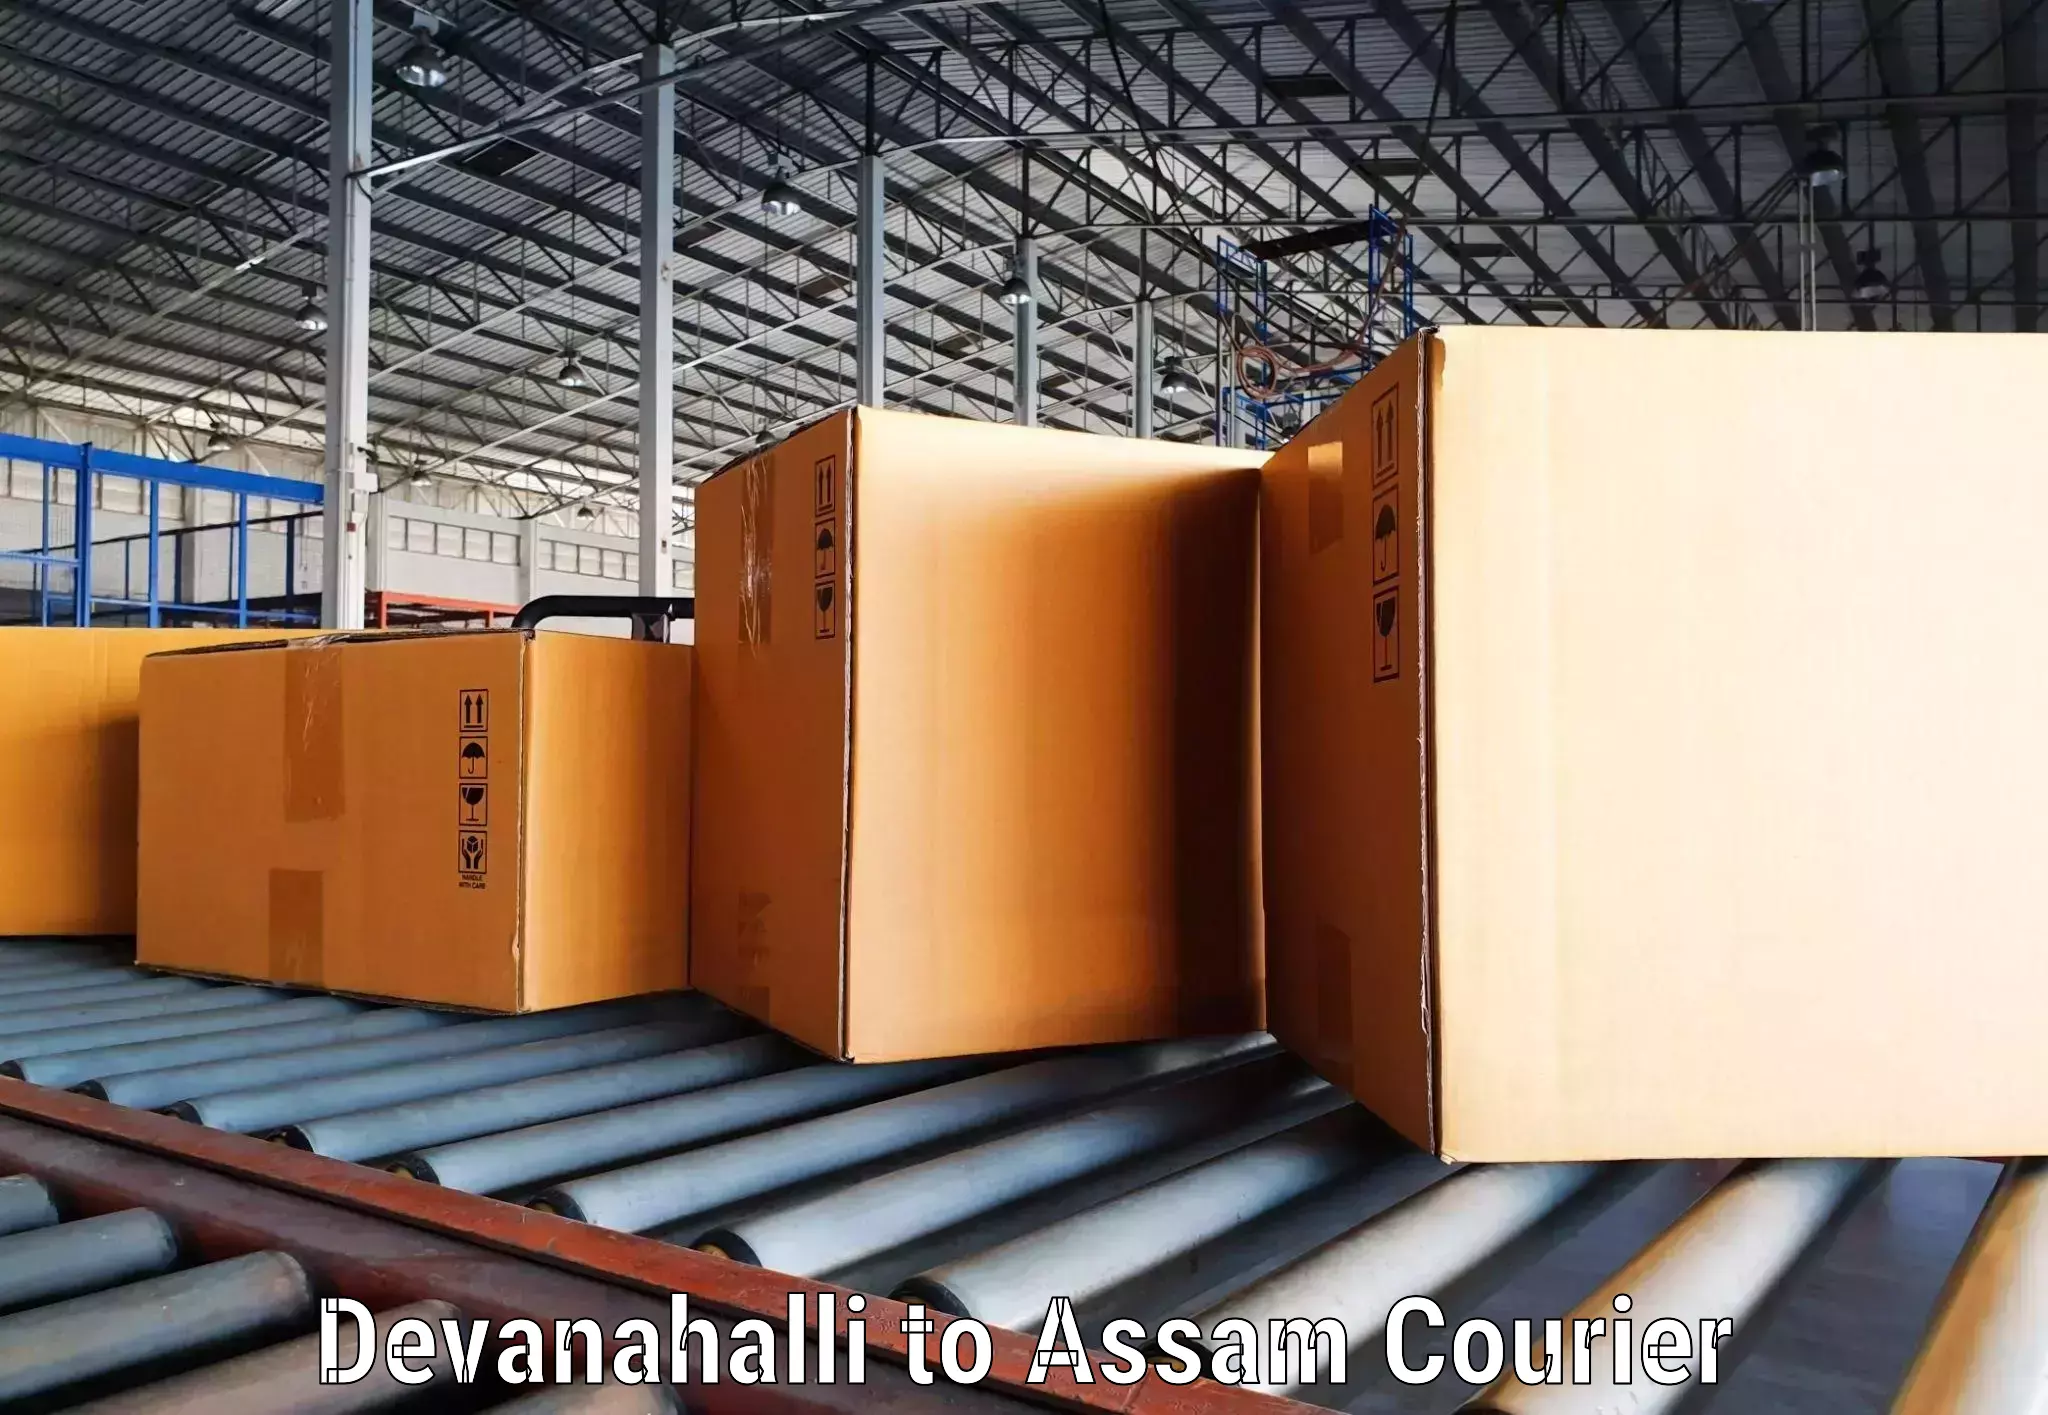 Courier service booking Devanahalli to Lala Assam